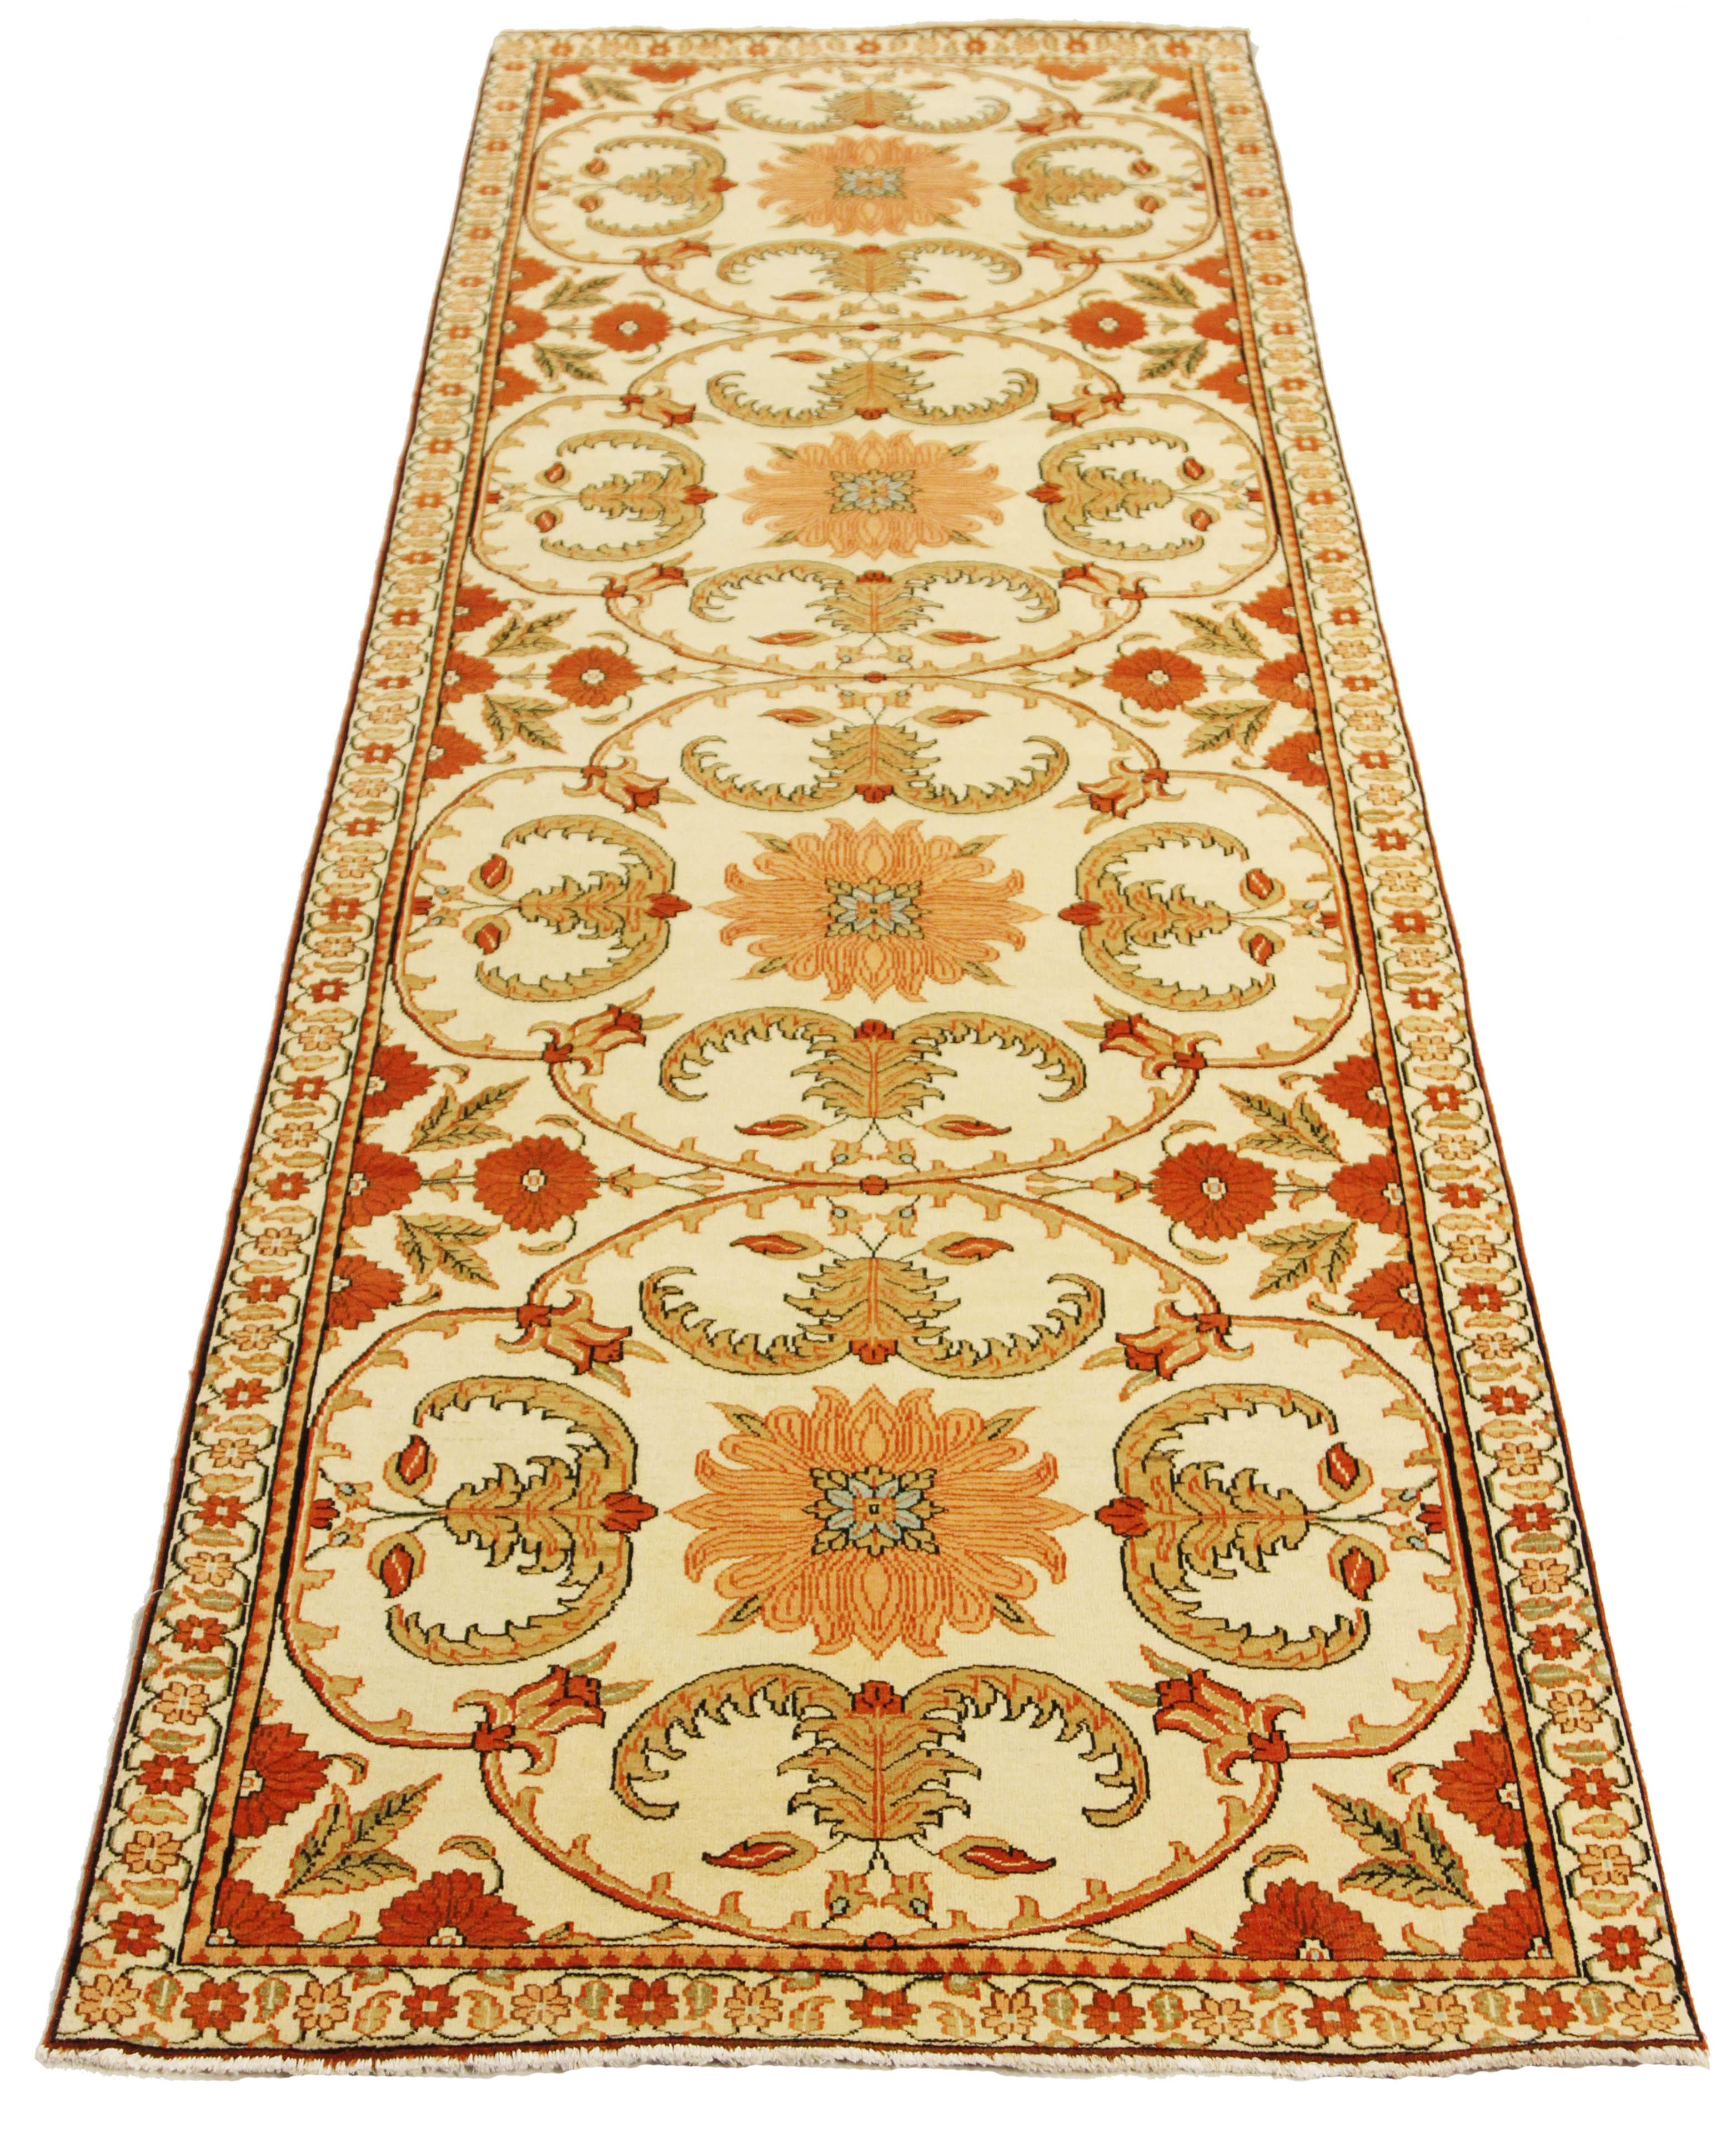 Antique Turkish rug handwoven from the finest sheep’s wool and colored with all-natural vegetable dyes that are safe for humans and pets. It’s a traditional Agra weaving design featuring botanical patterns in orange and beige on a plush ivory field.